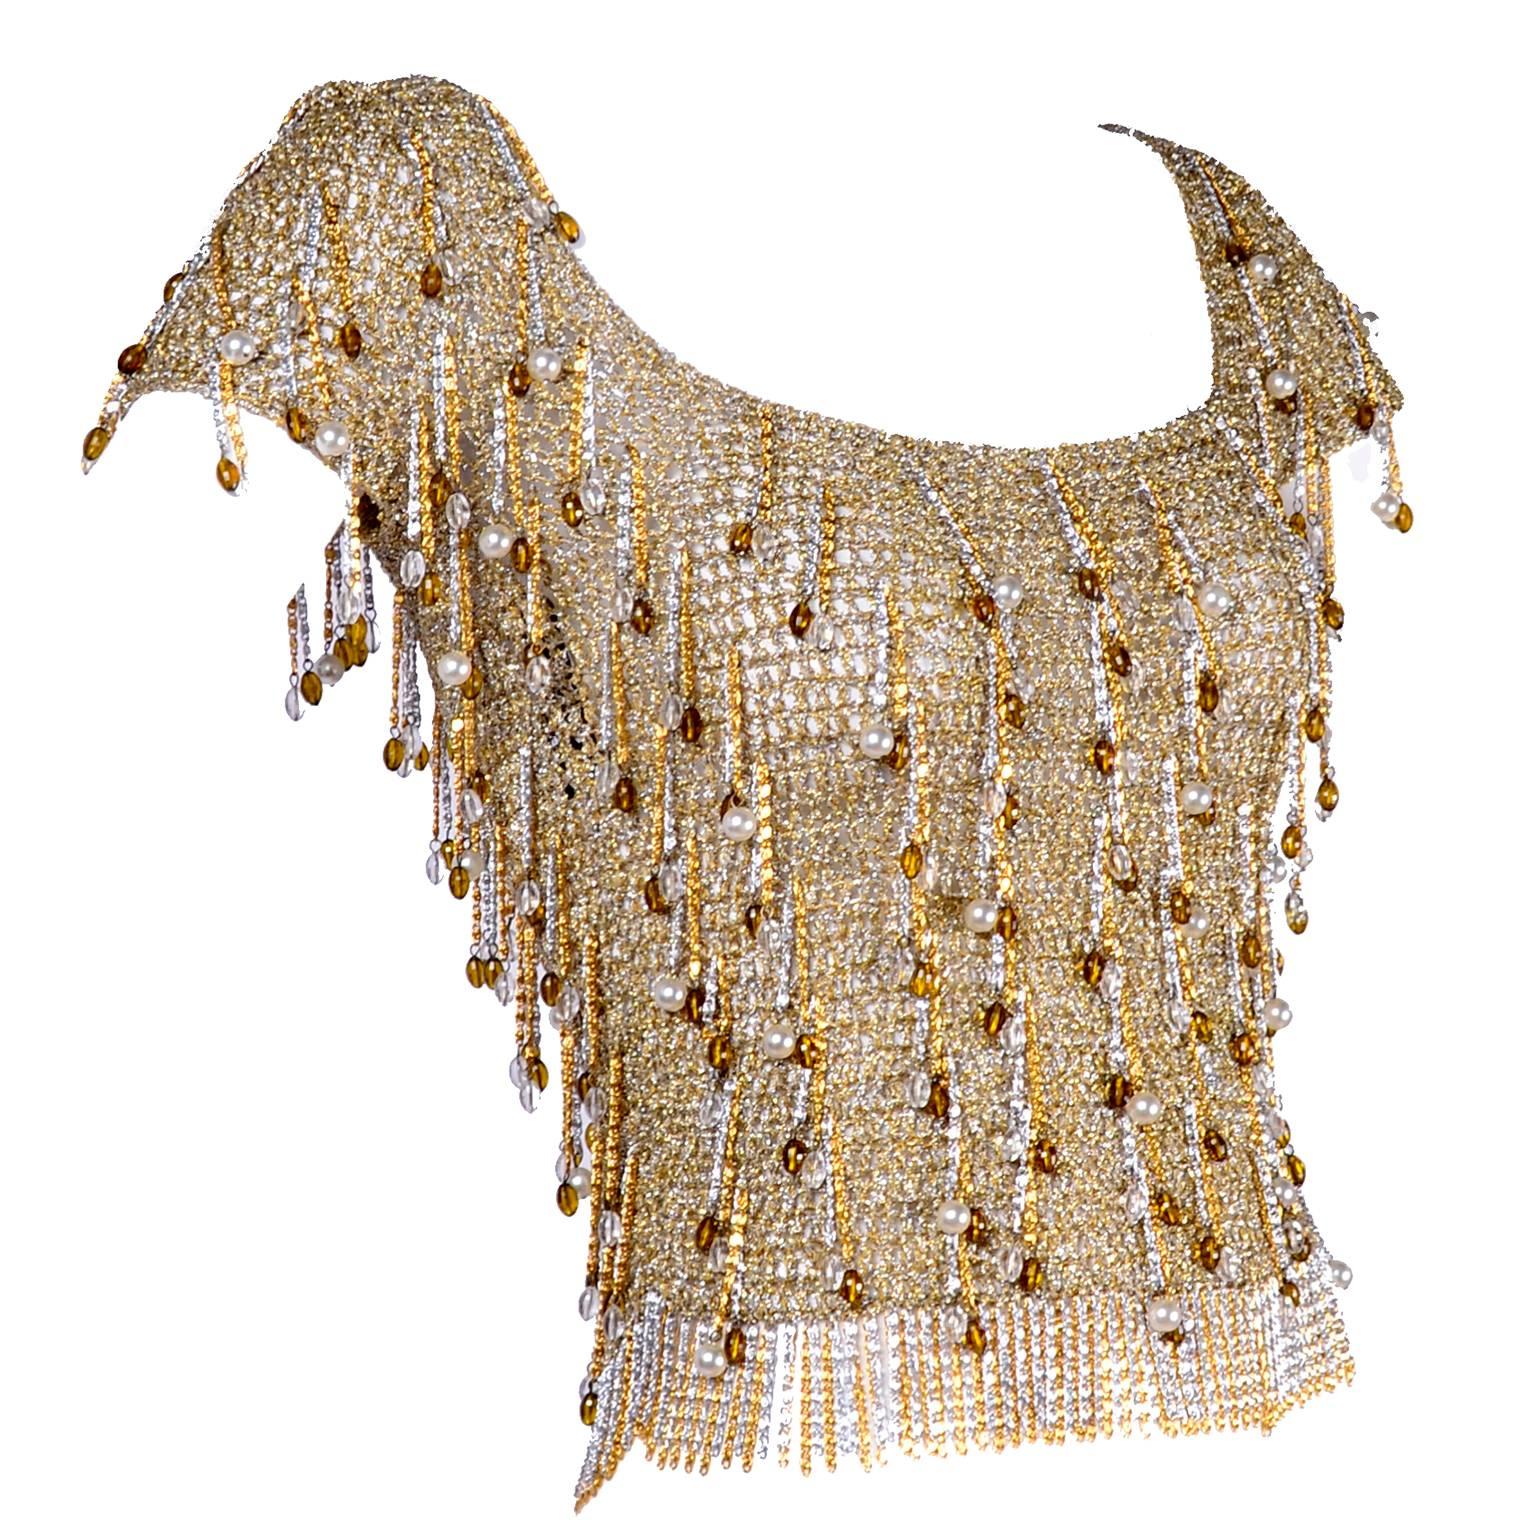 This is an absolutely  gorgeous 1970s silver and gold metallic lurex crochet top from Loris Azzaro.  This vintage short sleeve top has metal chain fringe and amber and clear beads as well as faux pearls. The top has quite a bit of stretch and is 19